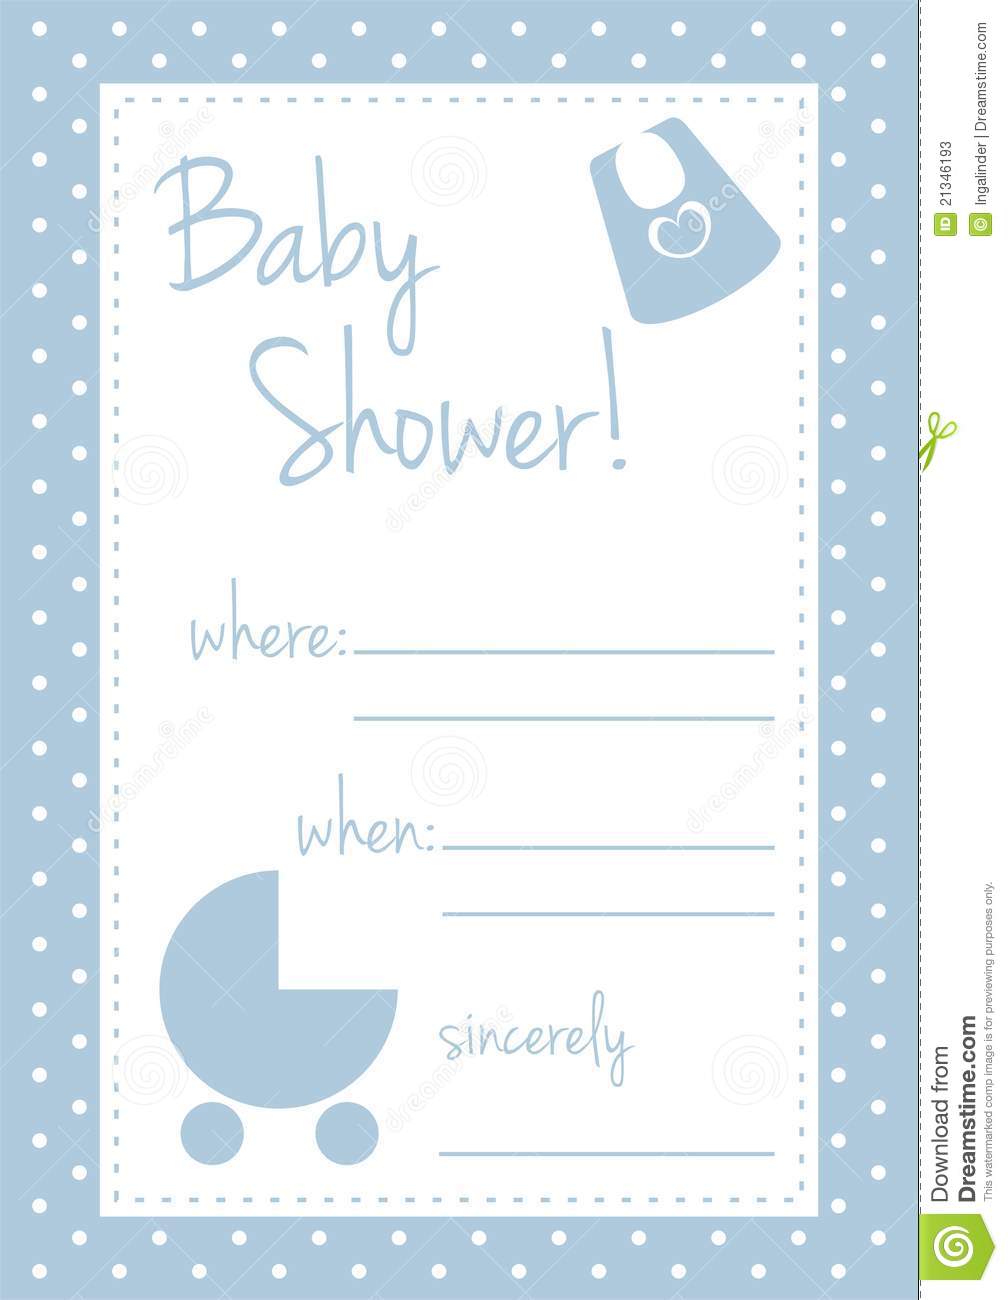 Full Size of Baby Shower:graceful Baby Shower Cards Image Designs Baby Shower Cards As Well As Blue Punch For Baby Shower With Baby Shower Thank You Plus Baby Shower Quilt Together With Baby Shower Venue Ideas